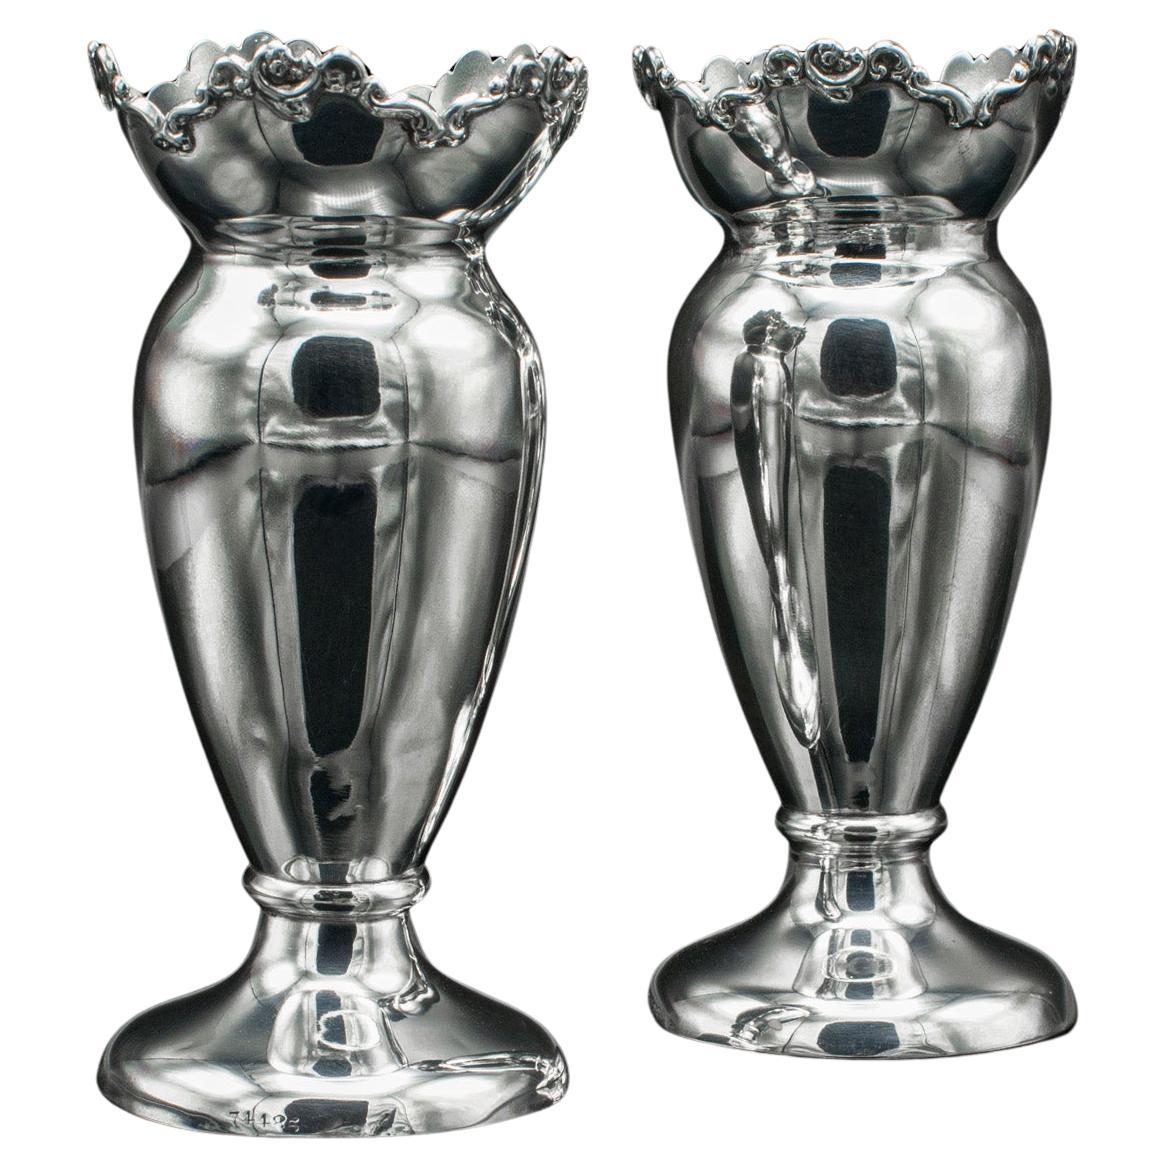 Pair Of Antique Duck Egg Cups, English, Silver, Vase, Edwardian, Hallmarked 1904 For Sale